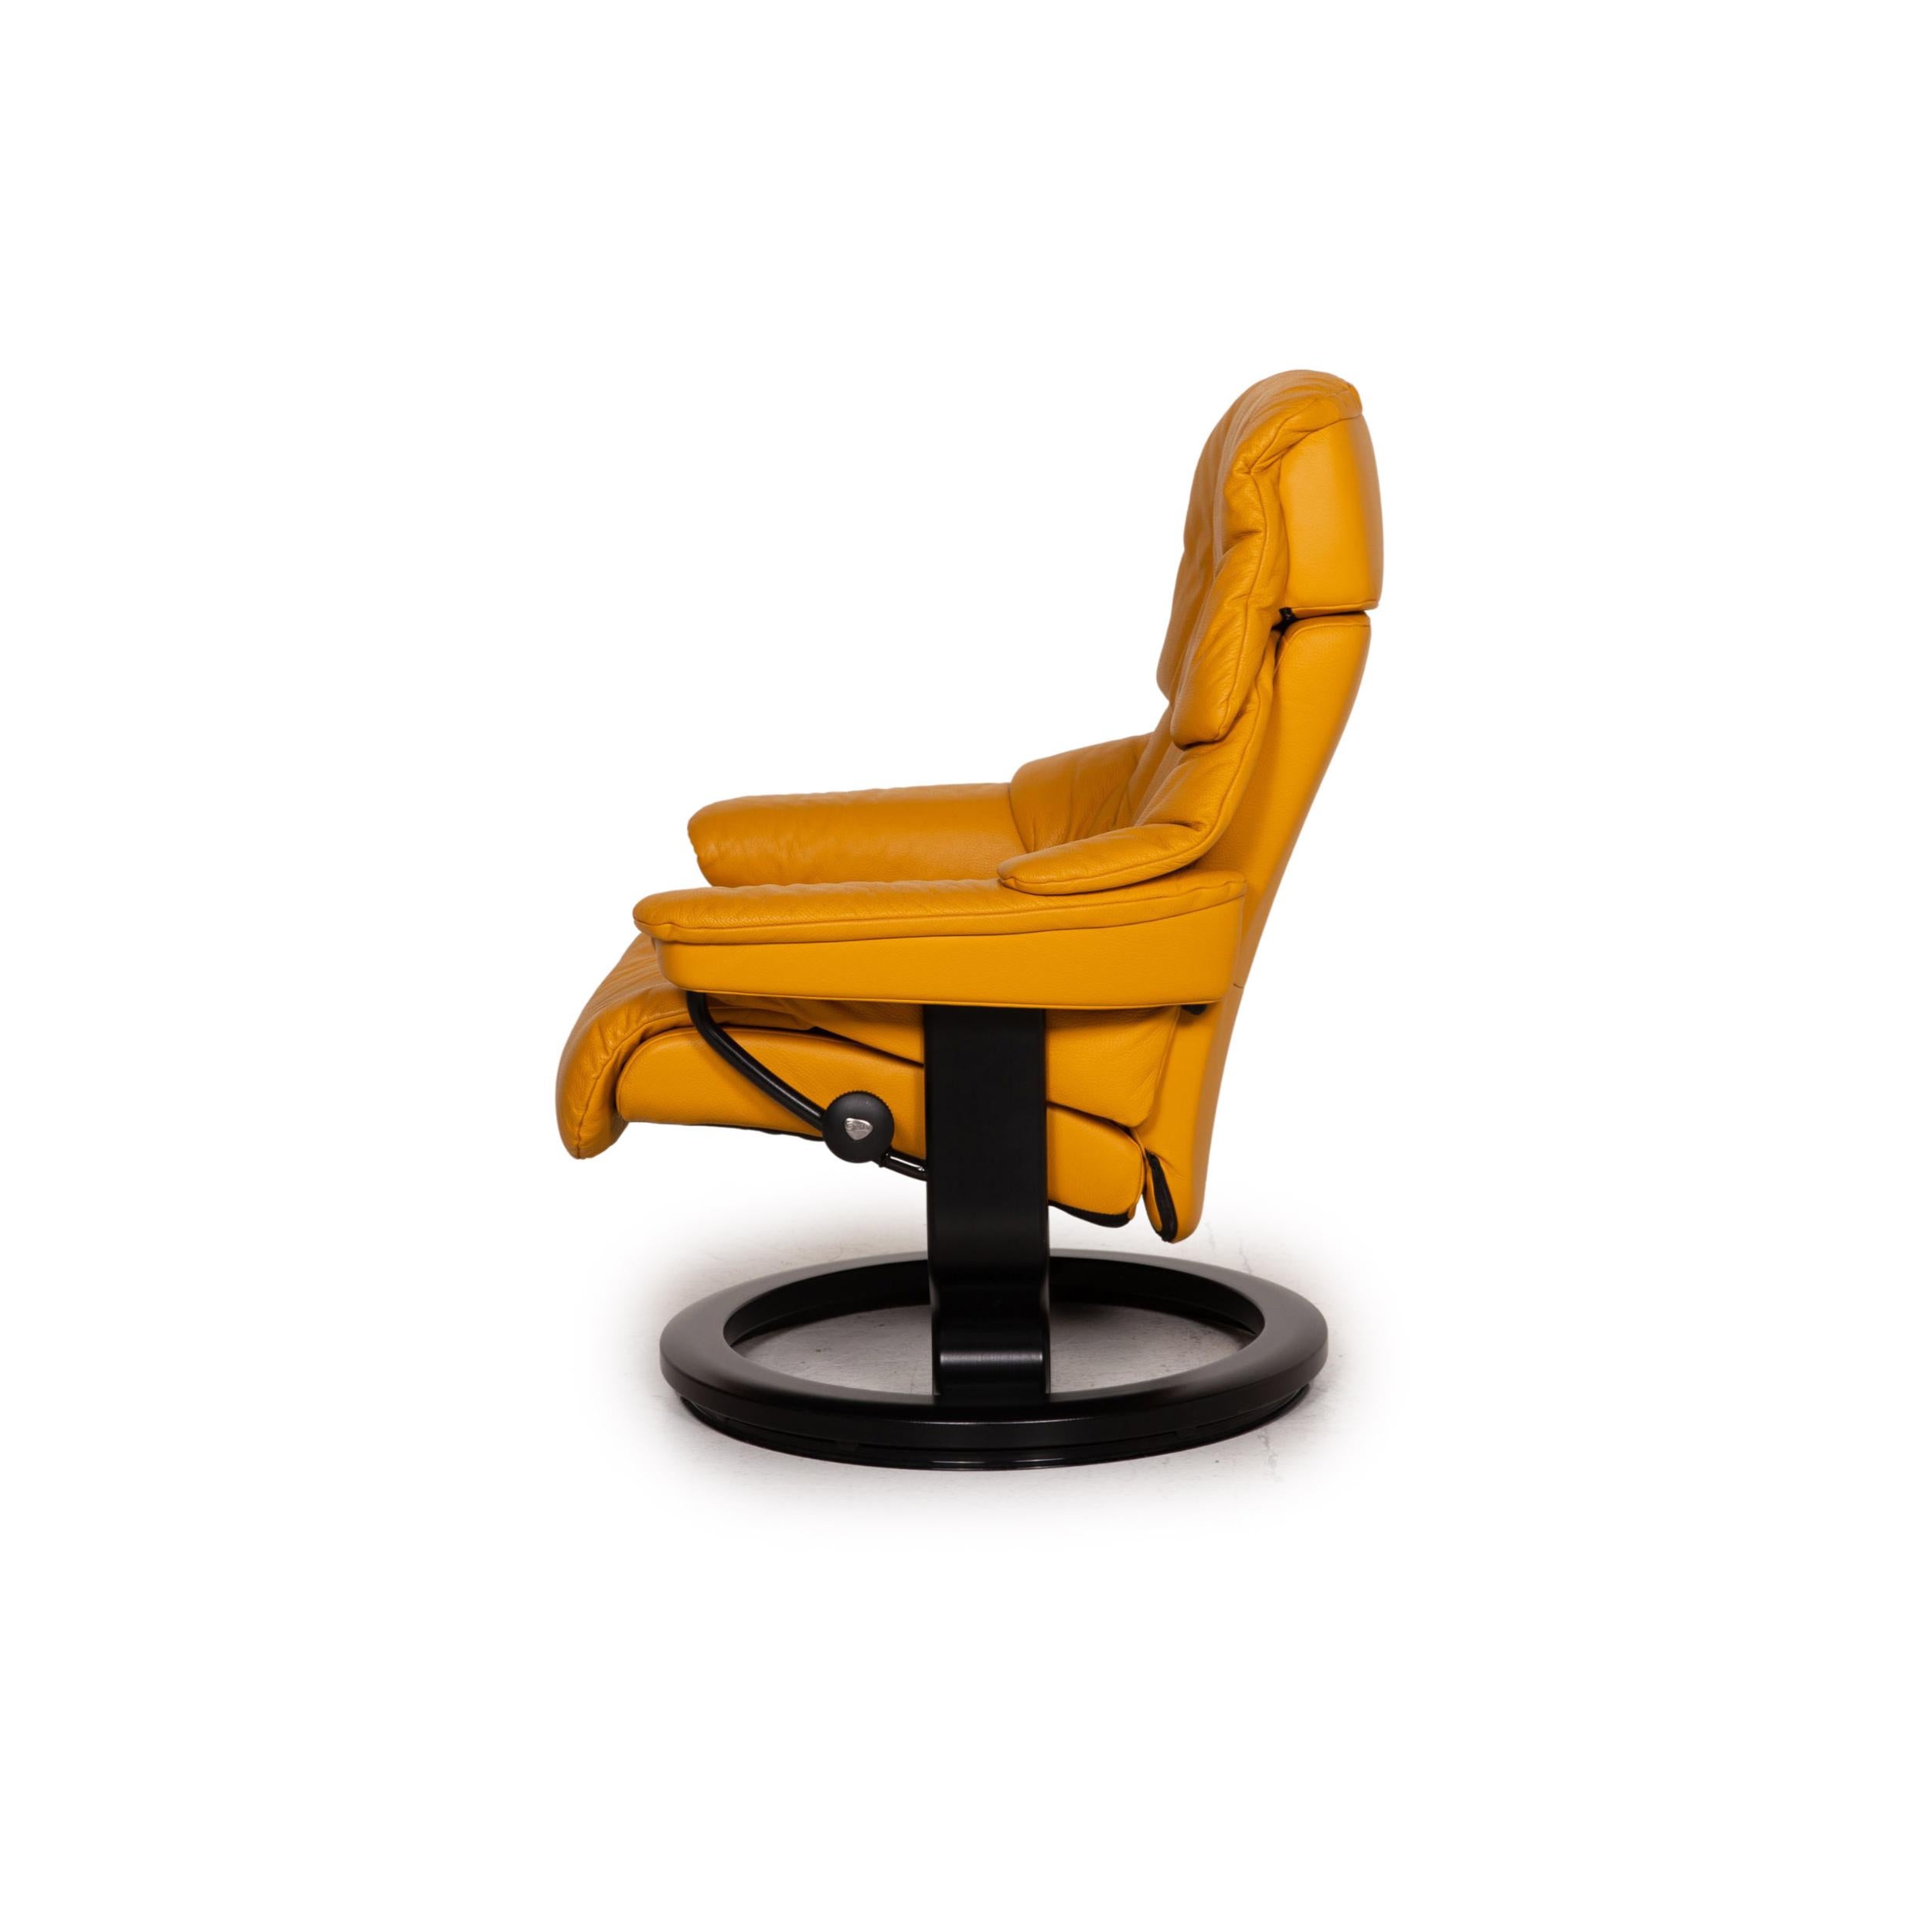 Stressless Reno Leather Recliner Yellow Armchair 4